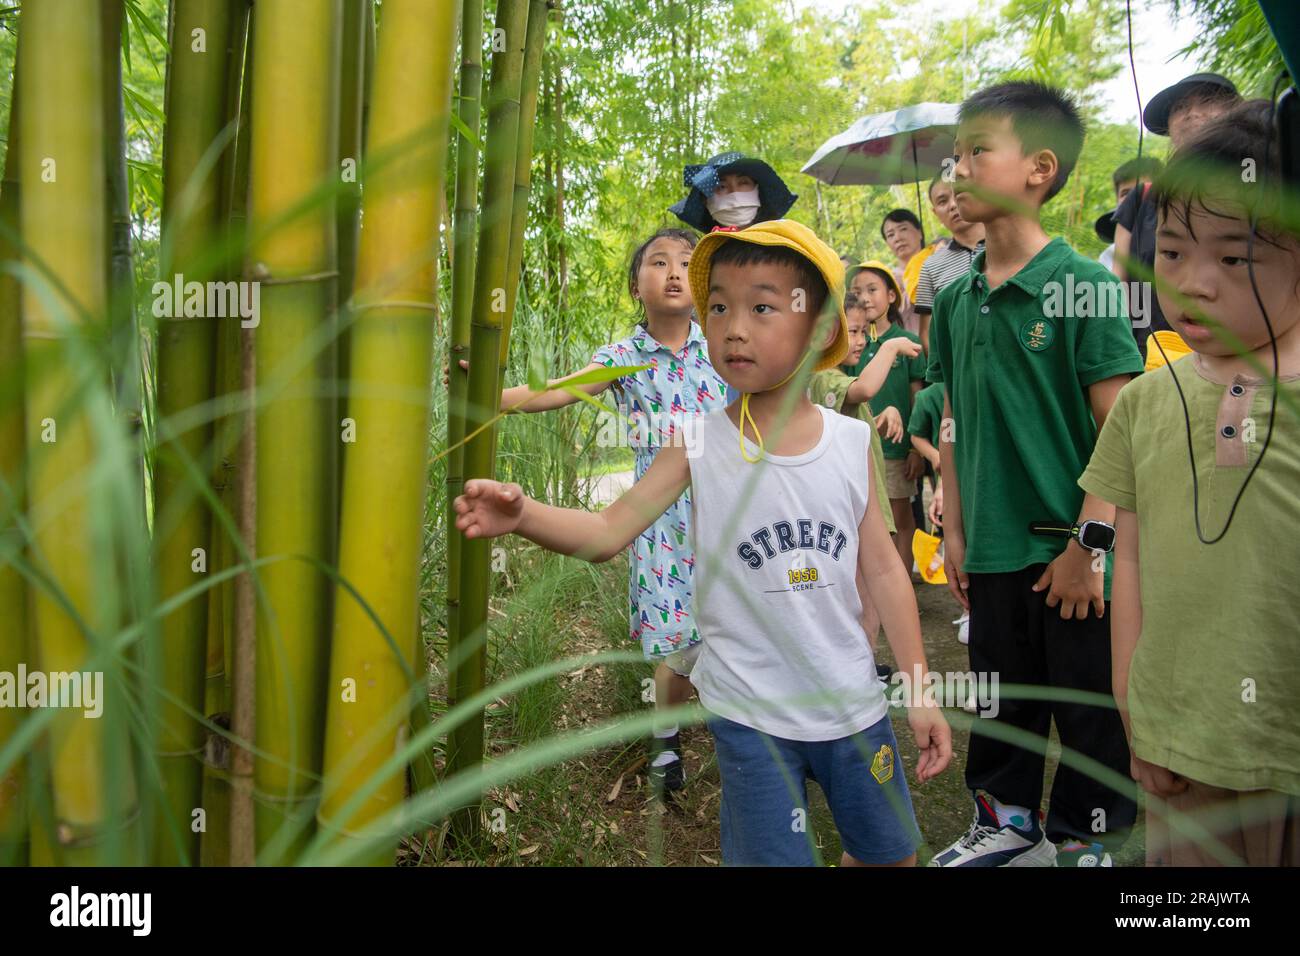 (230704) -- CHONGQING, July 4, 2023 (Xinhua) -- Children learn to identify plants during an ecological education tour on Guangyang Isle in southwest China's Chongqing, July 3, 2023. Located at the most extensive green island in the upper reaches of the Yangtze River, Guangyang Isle, covering around 10 square km, has a vegetation coverage rate of over 90 percent, and 594 species of plants and 452 species of animals have been recorded. But its ecological system and biodiversity were severely damaged due to a number of aggressive real estate projects that had lasted for years. In 2017, the comme Stock Photo